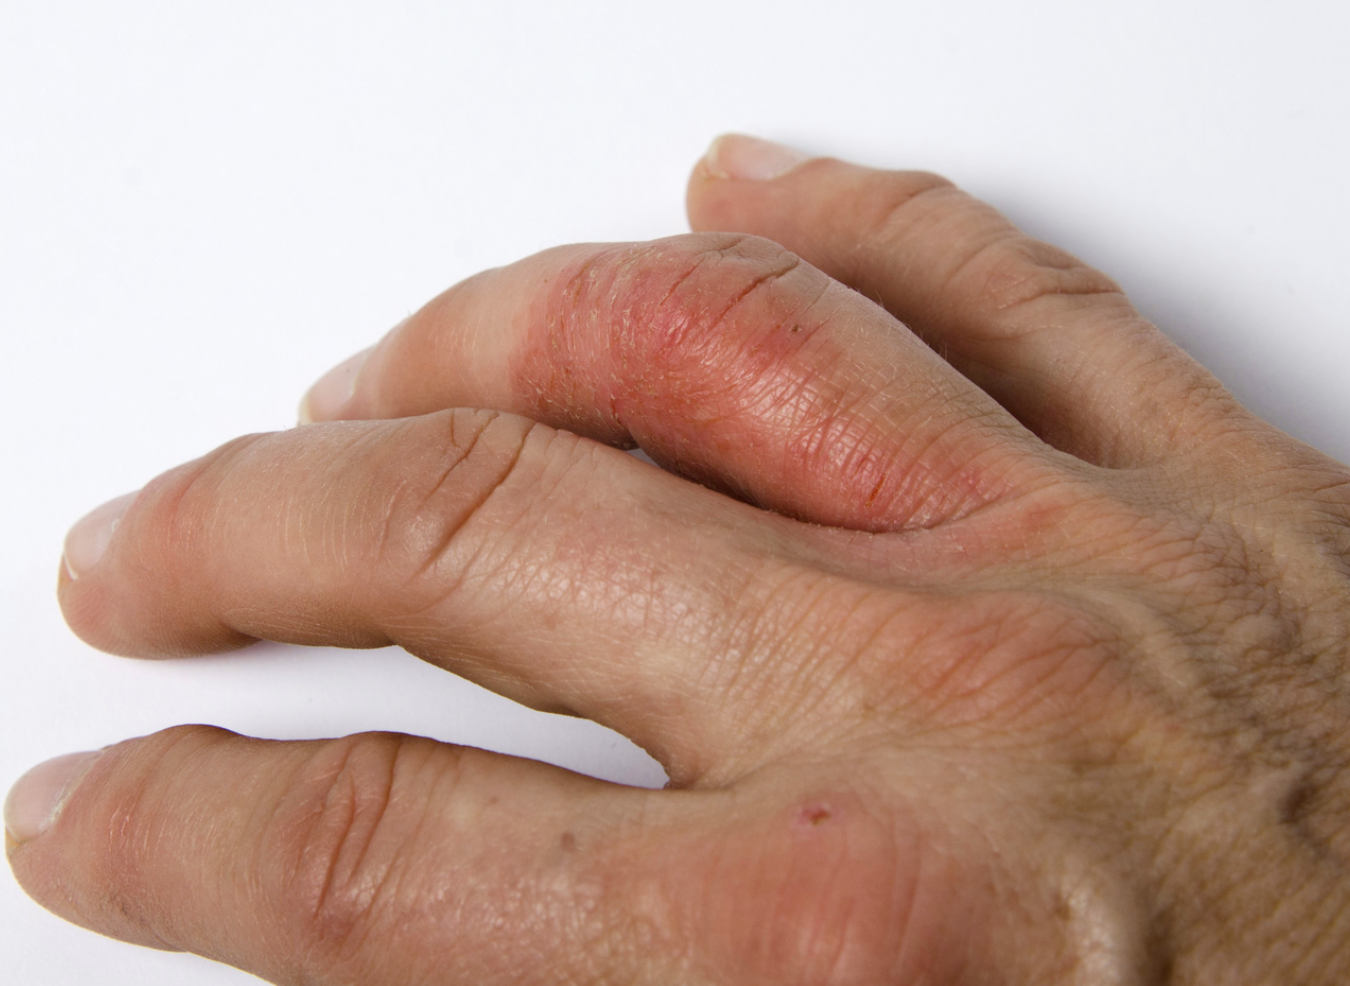 Rates of Hand Eczema Among Health Care Workers Grew During COVID-19 Pandemic